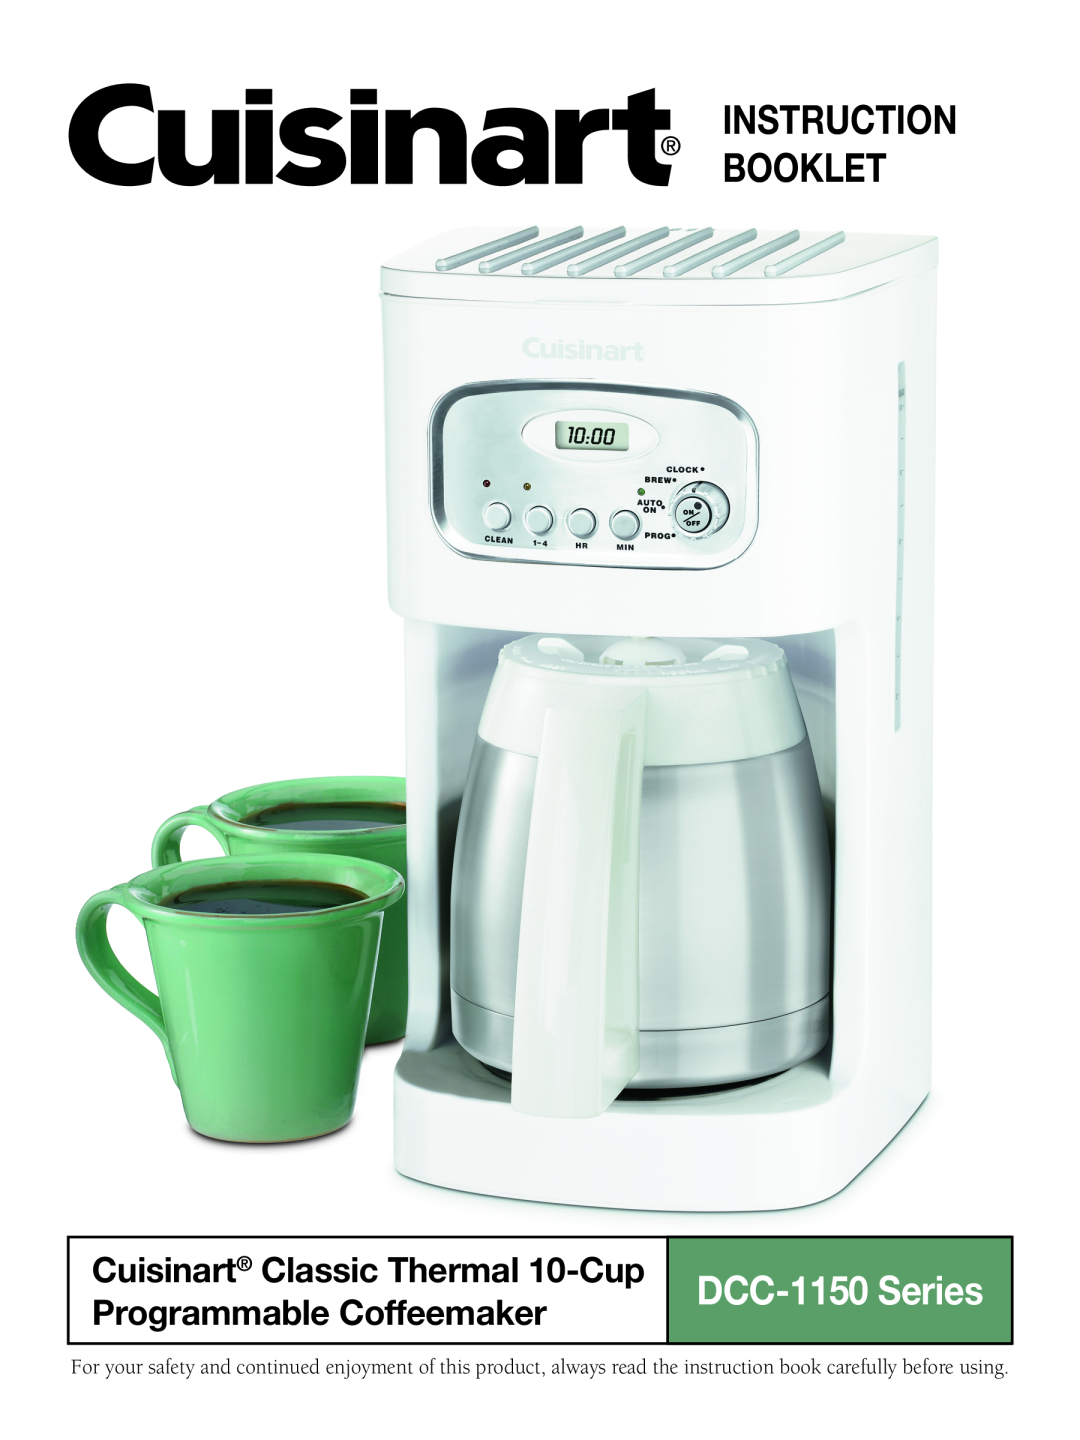 Cuisinart DCC-1150 Series, 07CU26075 manual Instruction Booklet, Cuisinart Classic Thermal 10-Cup Programmable Coffeemaker 